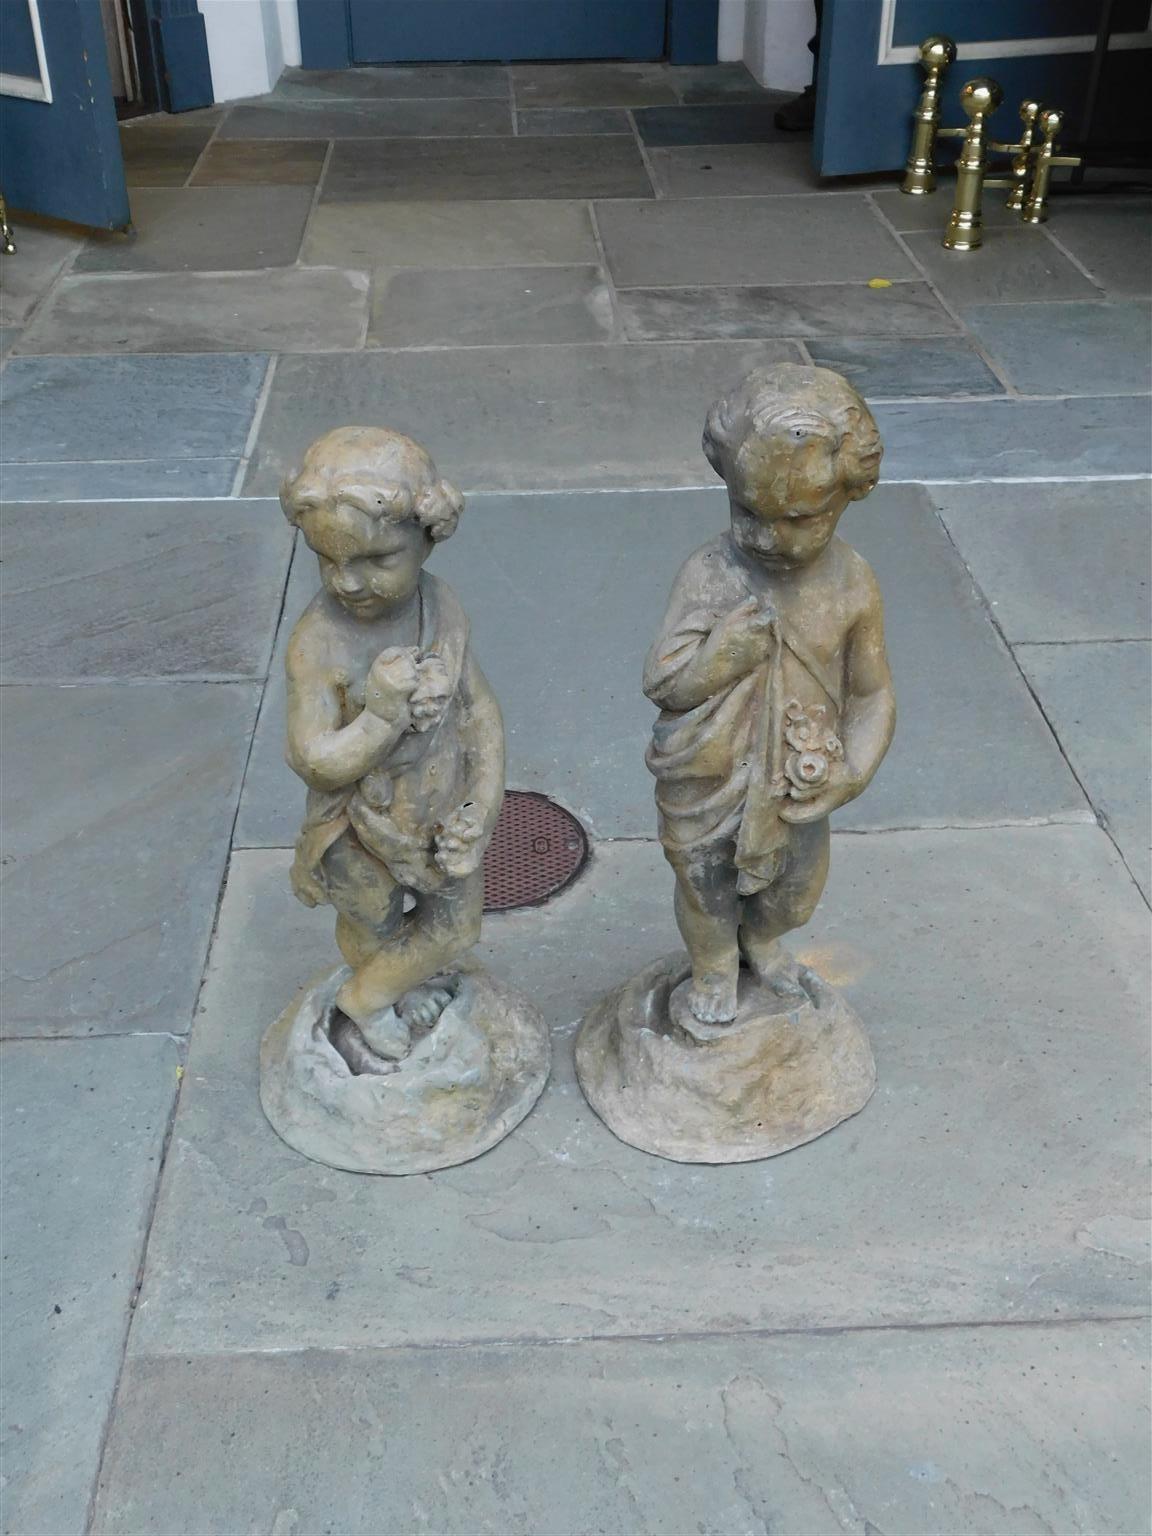 Pair of French lead figural boy and girl foliage garden statues standing on circular molded bases. Early 19th century.